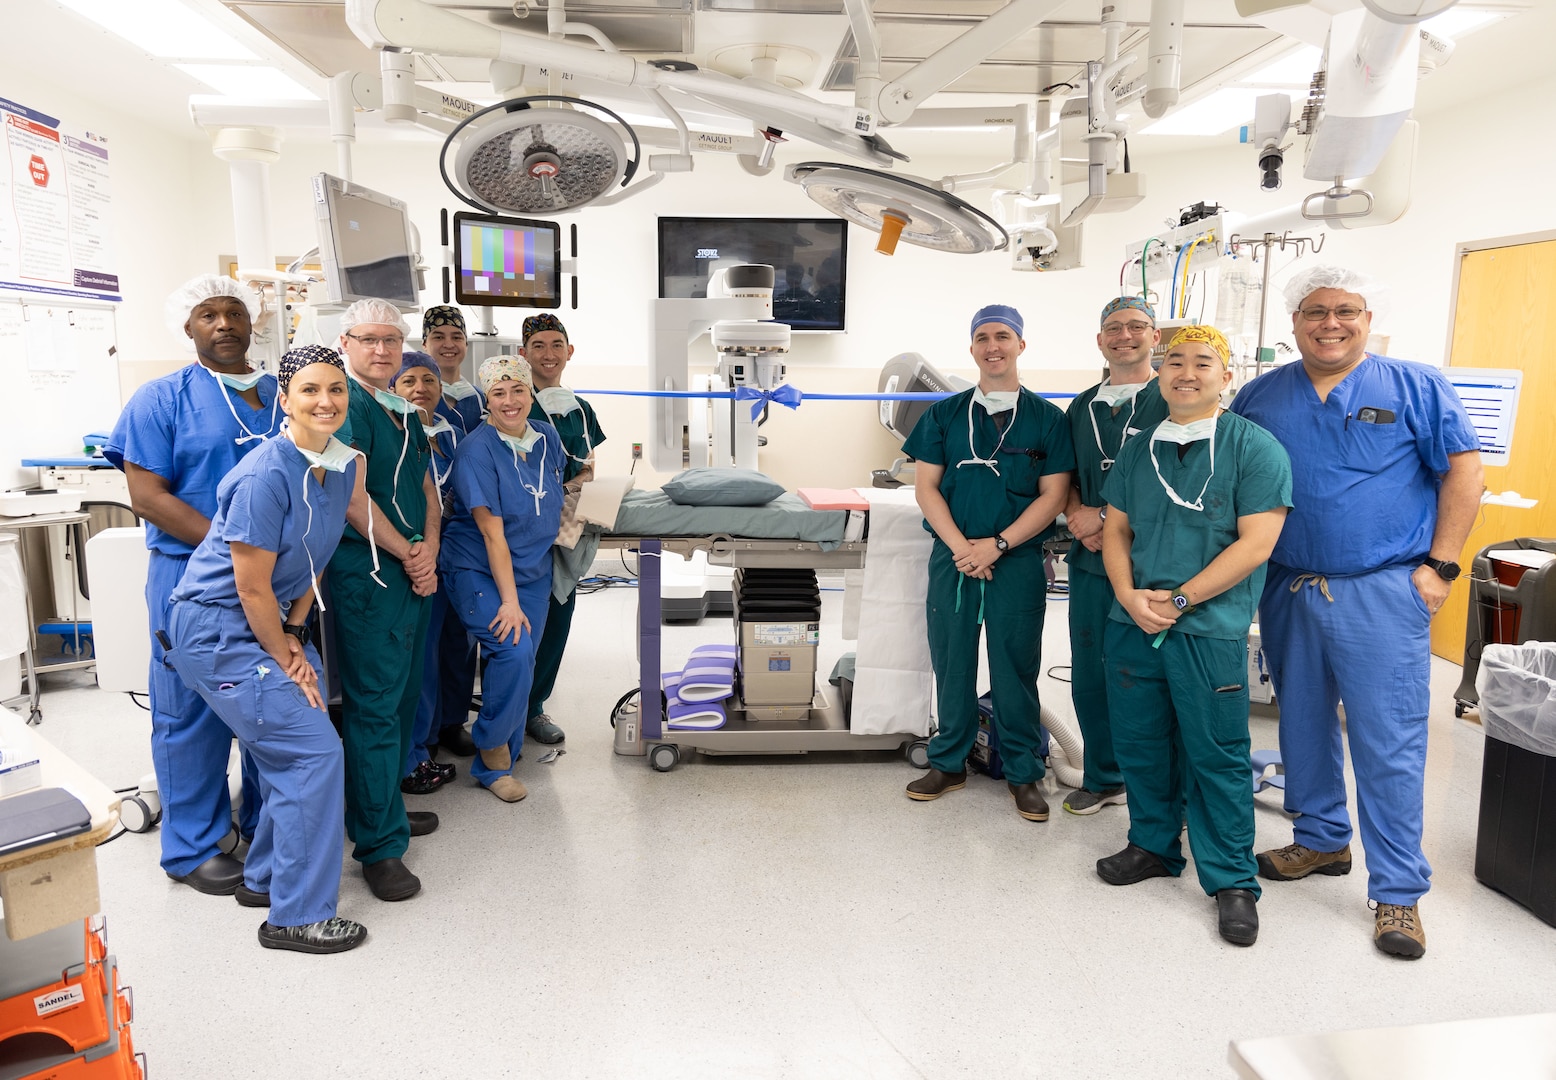 Group photo of the urological surgery team